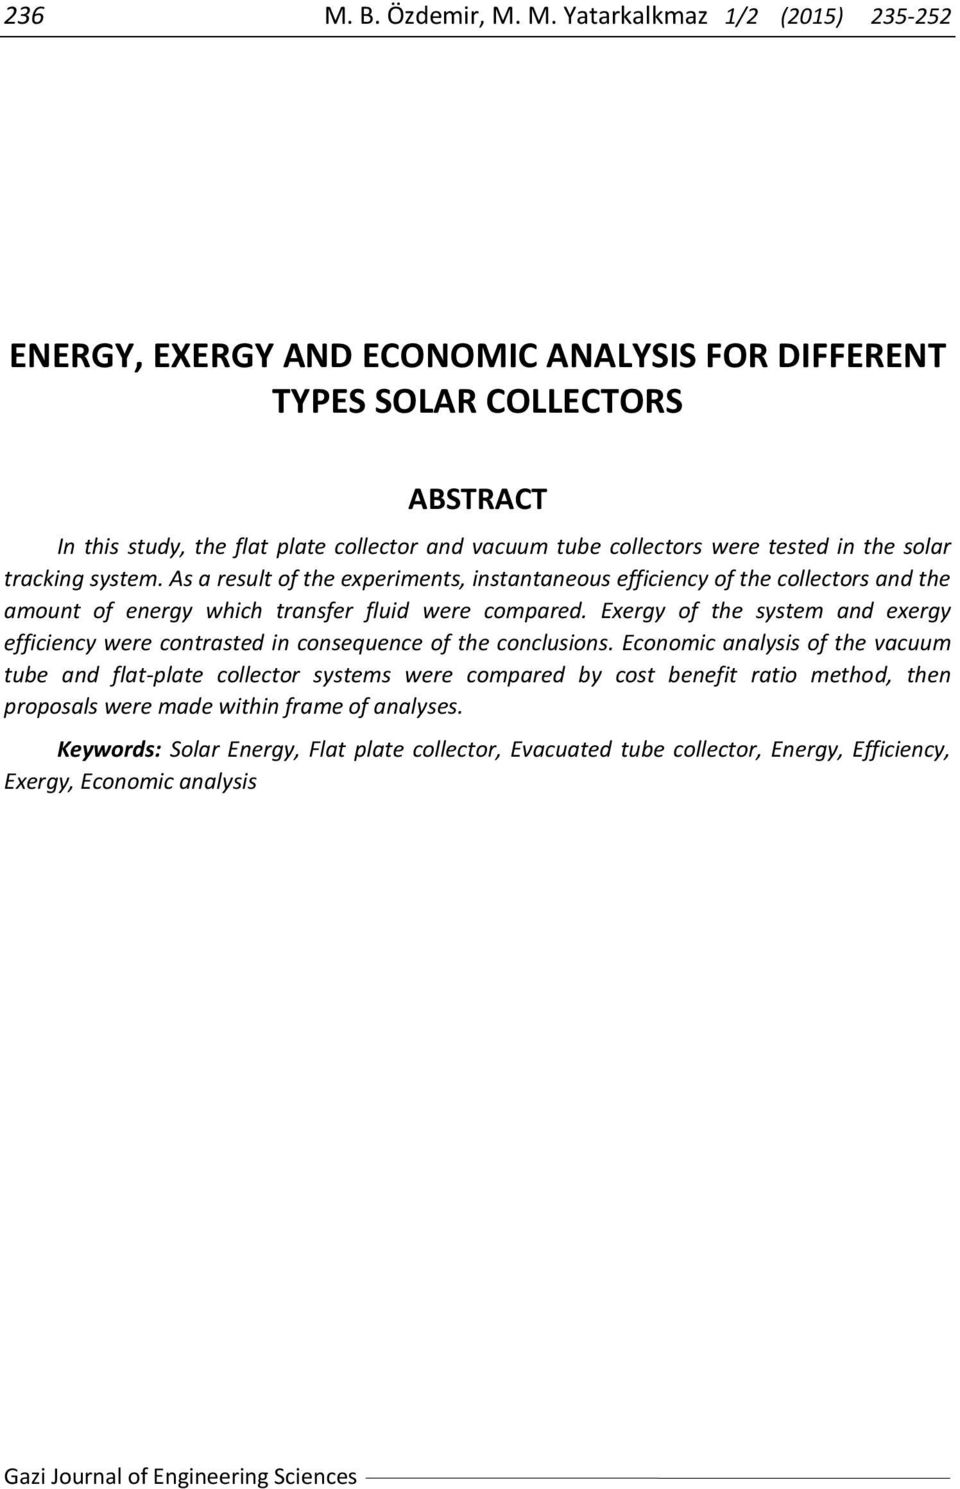 M. Yatarkalkmaz 1/2 (2015) 235-252 ENERGY, EXERGY AND ECONOMIC ANALYSIS FOR DIFFERENT TYPES SOLAR COLLECTORS ABSTRACT In this study, the flat plate collector and vacuum tube collectors were tested in